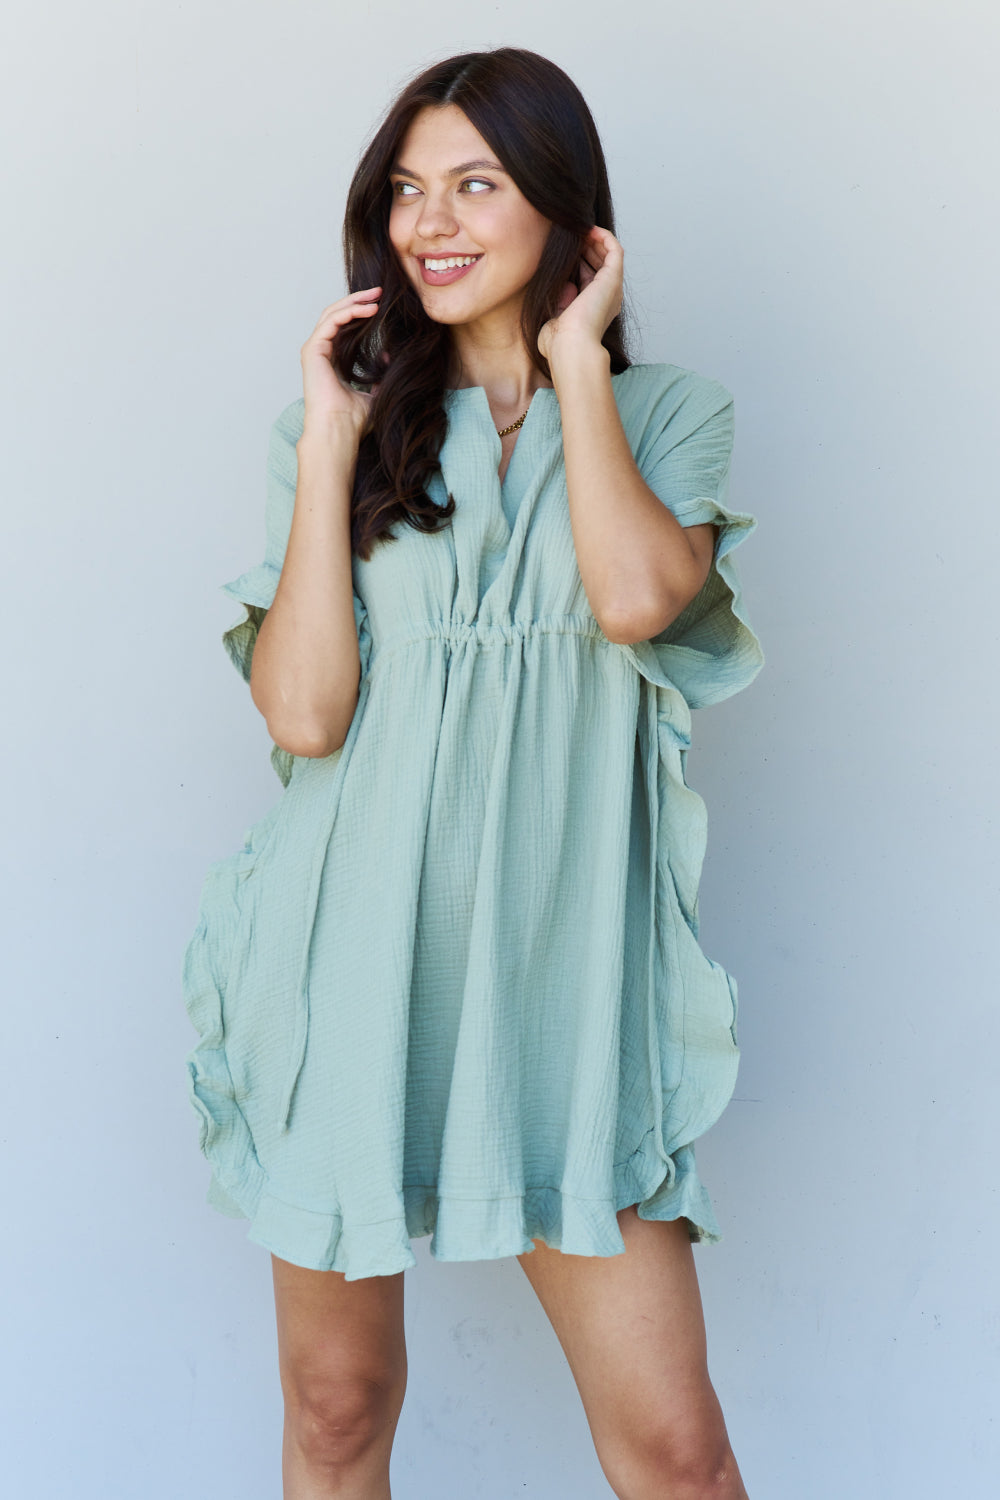 Ninexis Out Of Time Ruffle Hem Dress with Drawstring Waistband in Light Sage